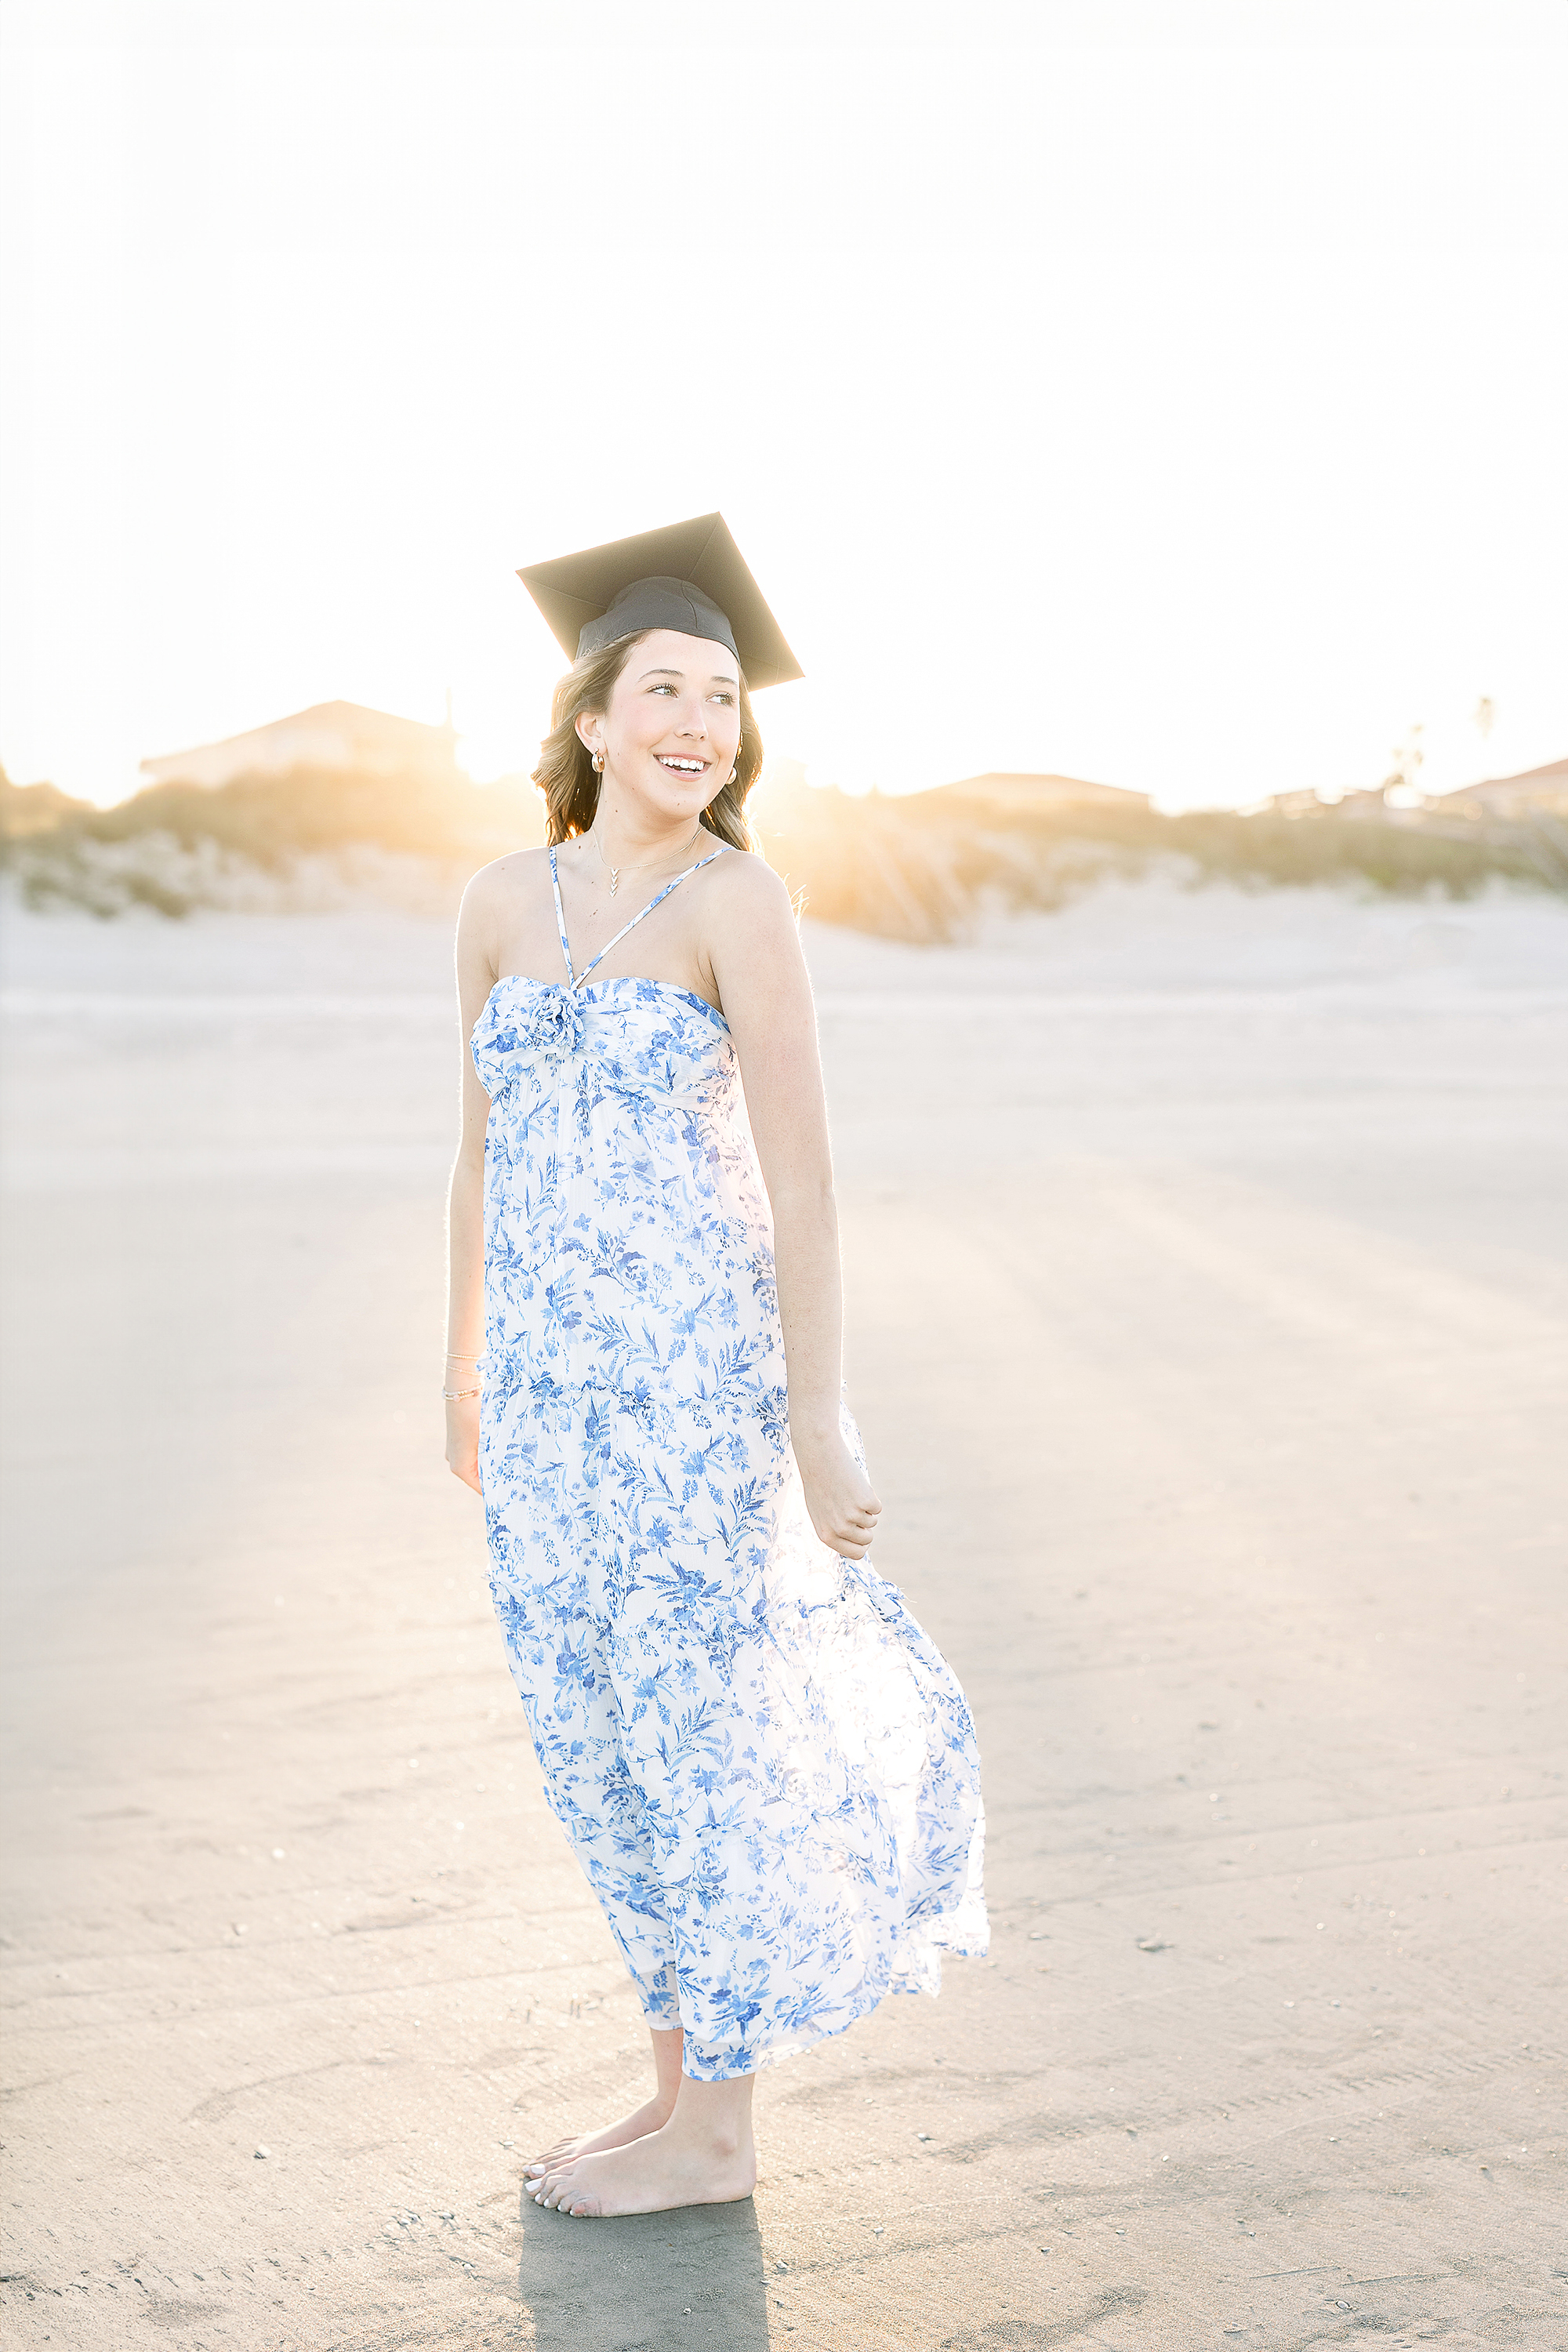 Coastal grad portrait of a young woman on St. Augustine Beach.